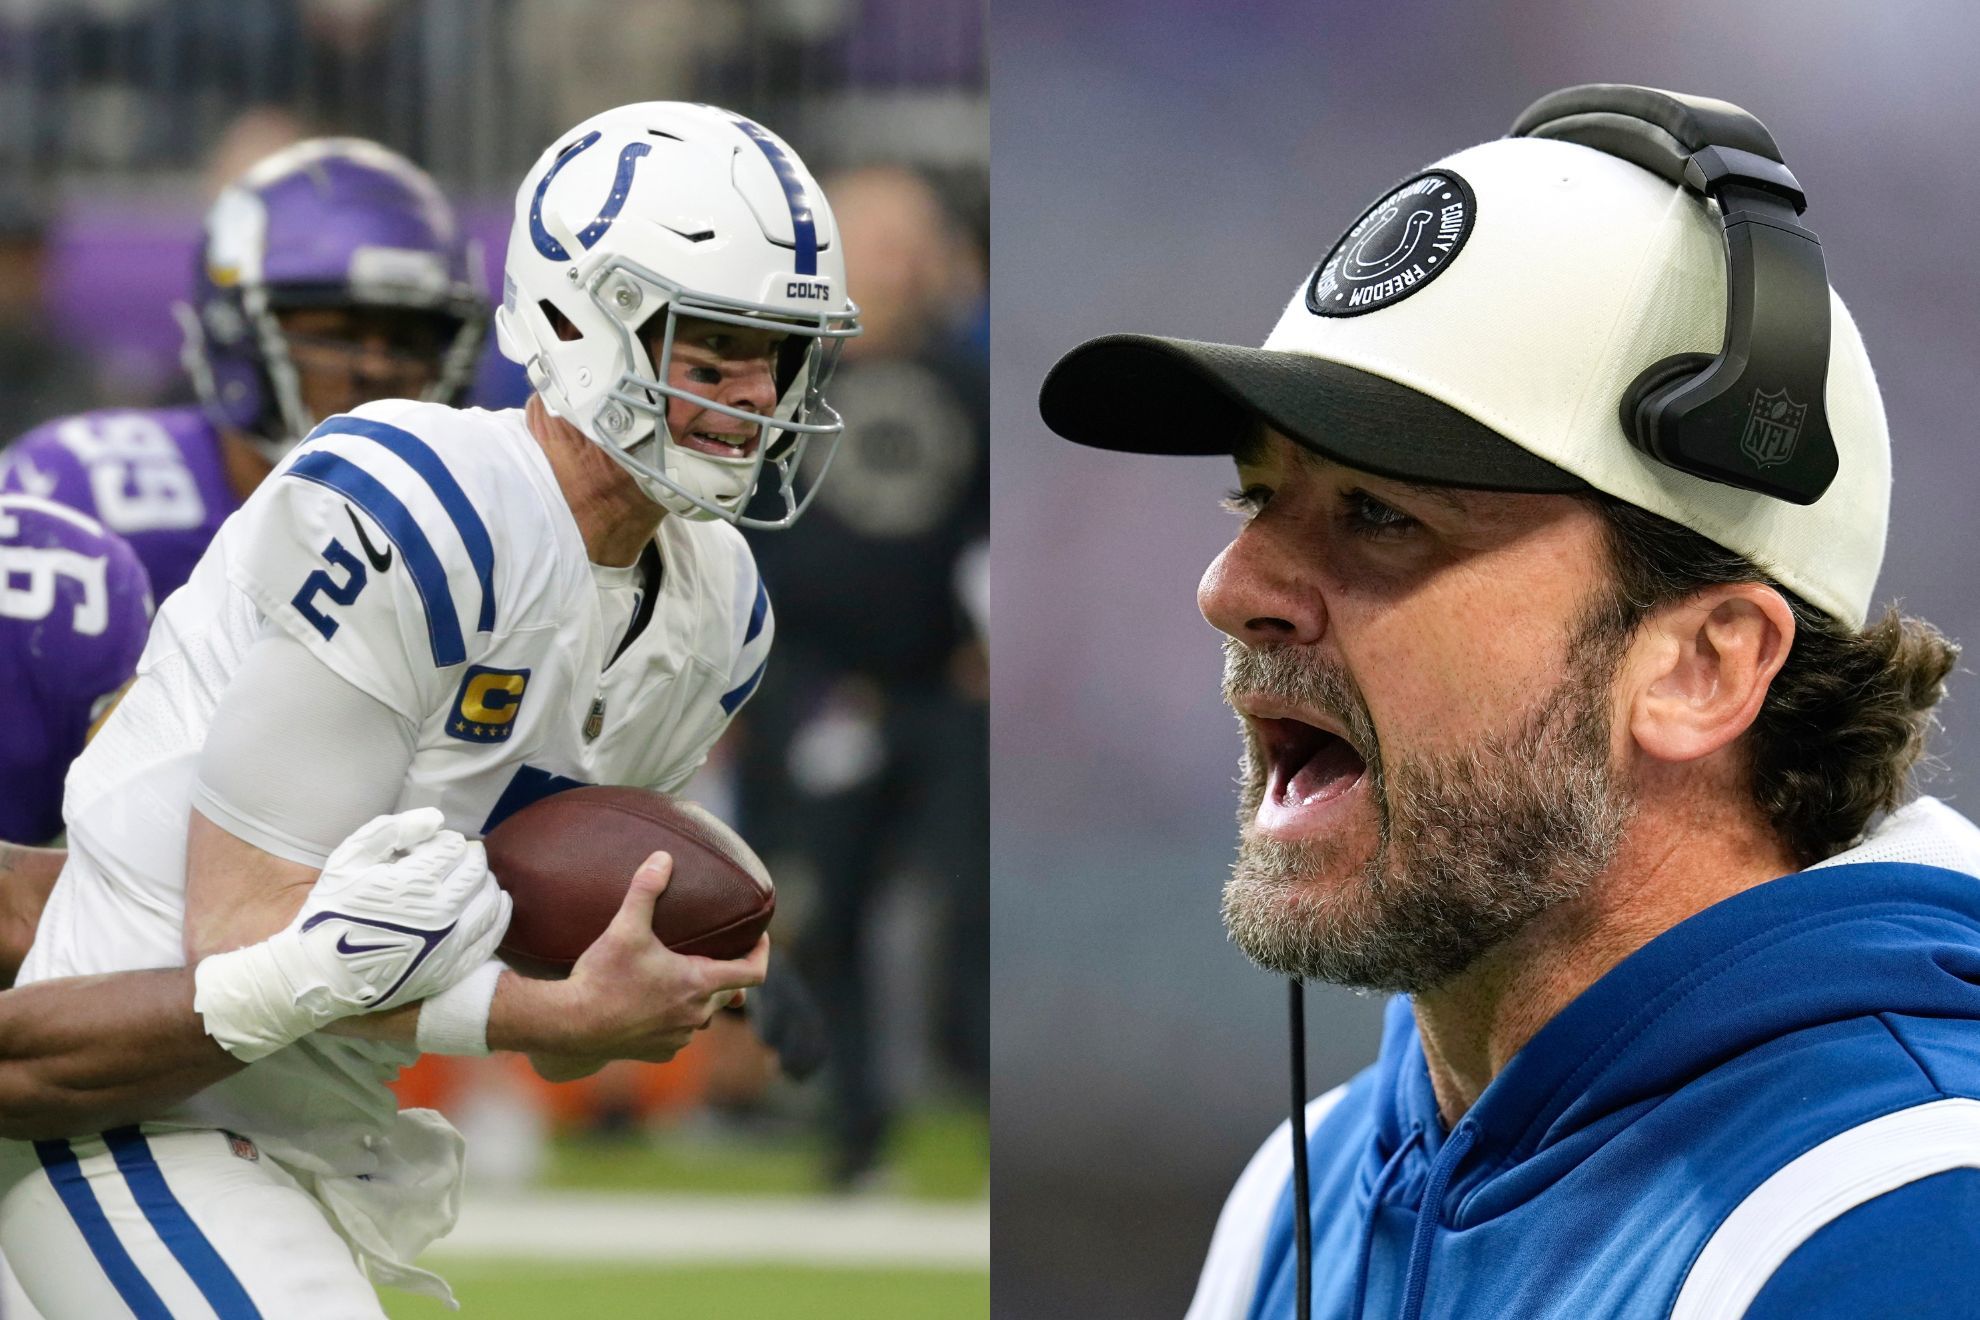 Matt Ryan (left) and Jeff Saturday (right), Indianapolis Colts